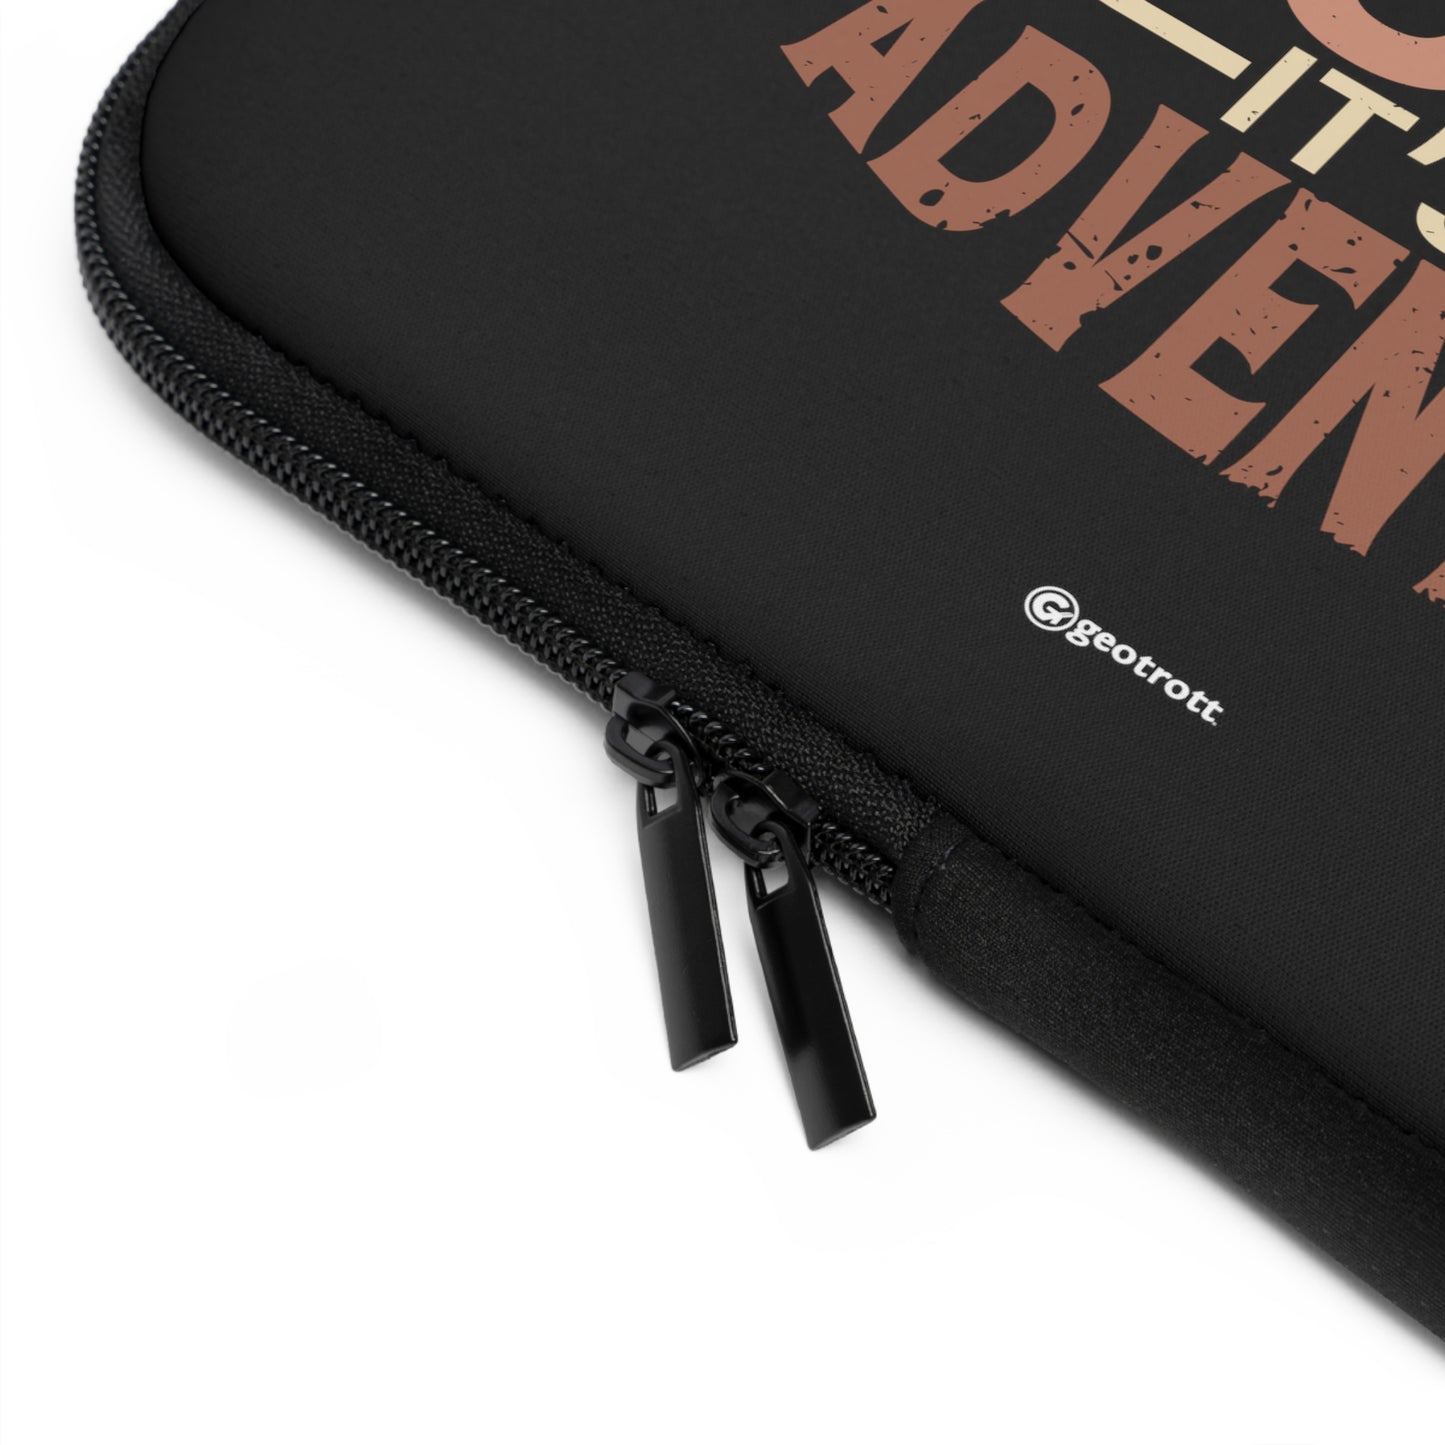 Gaming is not a Hobby is an Adventure Gamer Gaming Lightweight Smooth Neoprene Laptop Sleeve